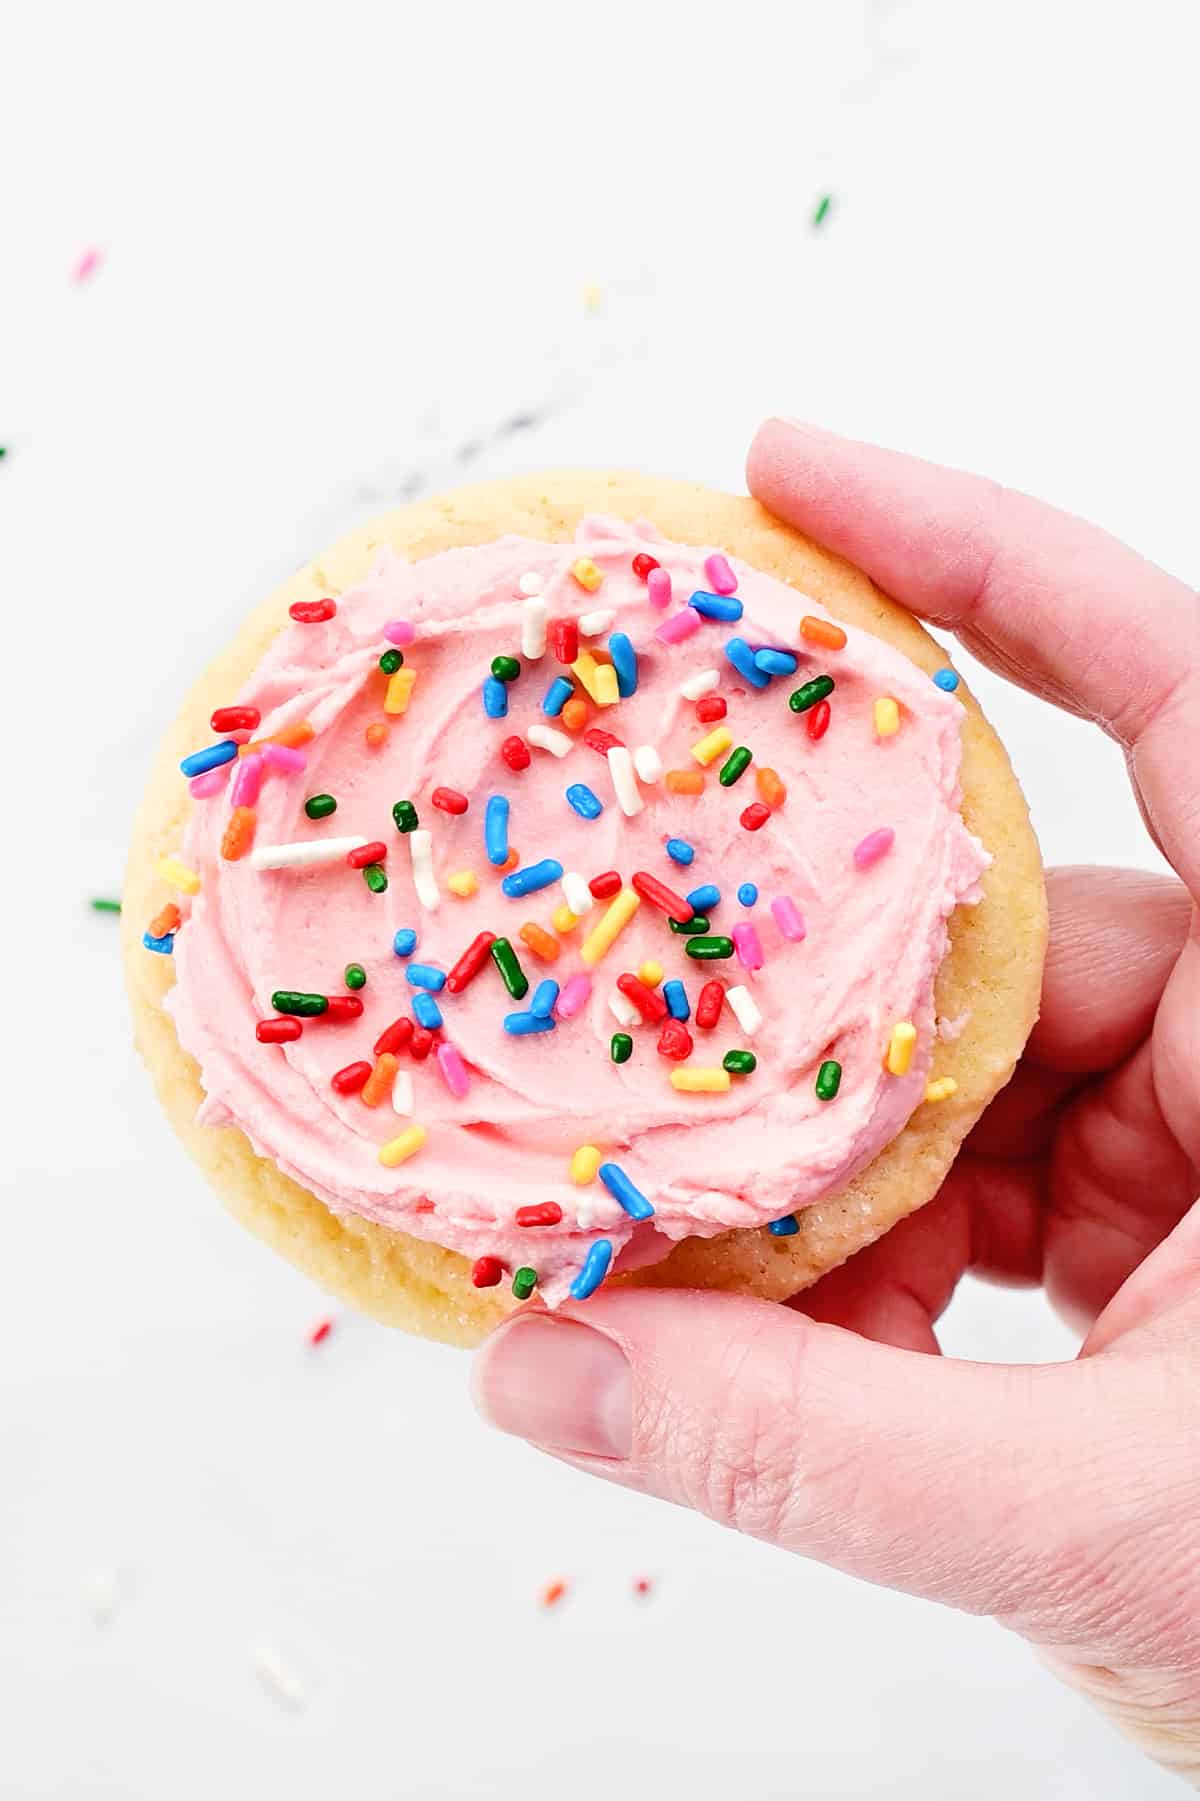 A hand holding a sugar cookie with pink buttercream frosting and sprinkles.